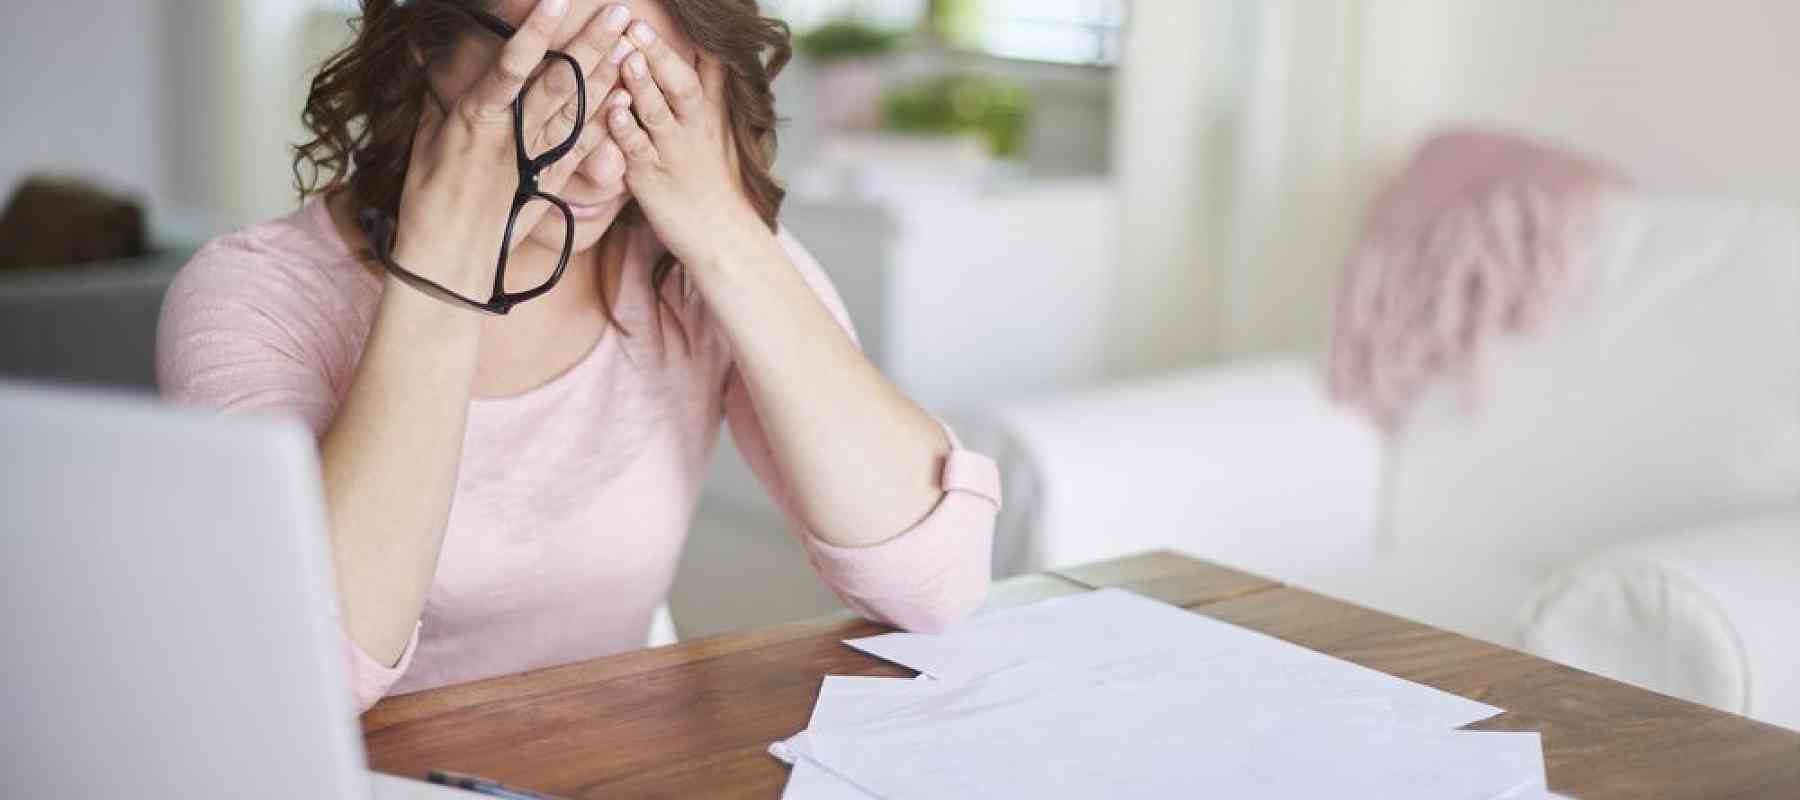 Household Items That Cause You Stress